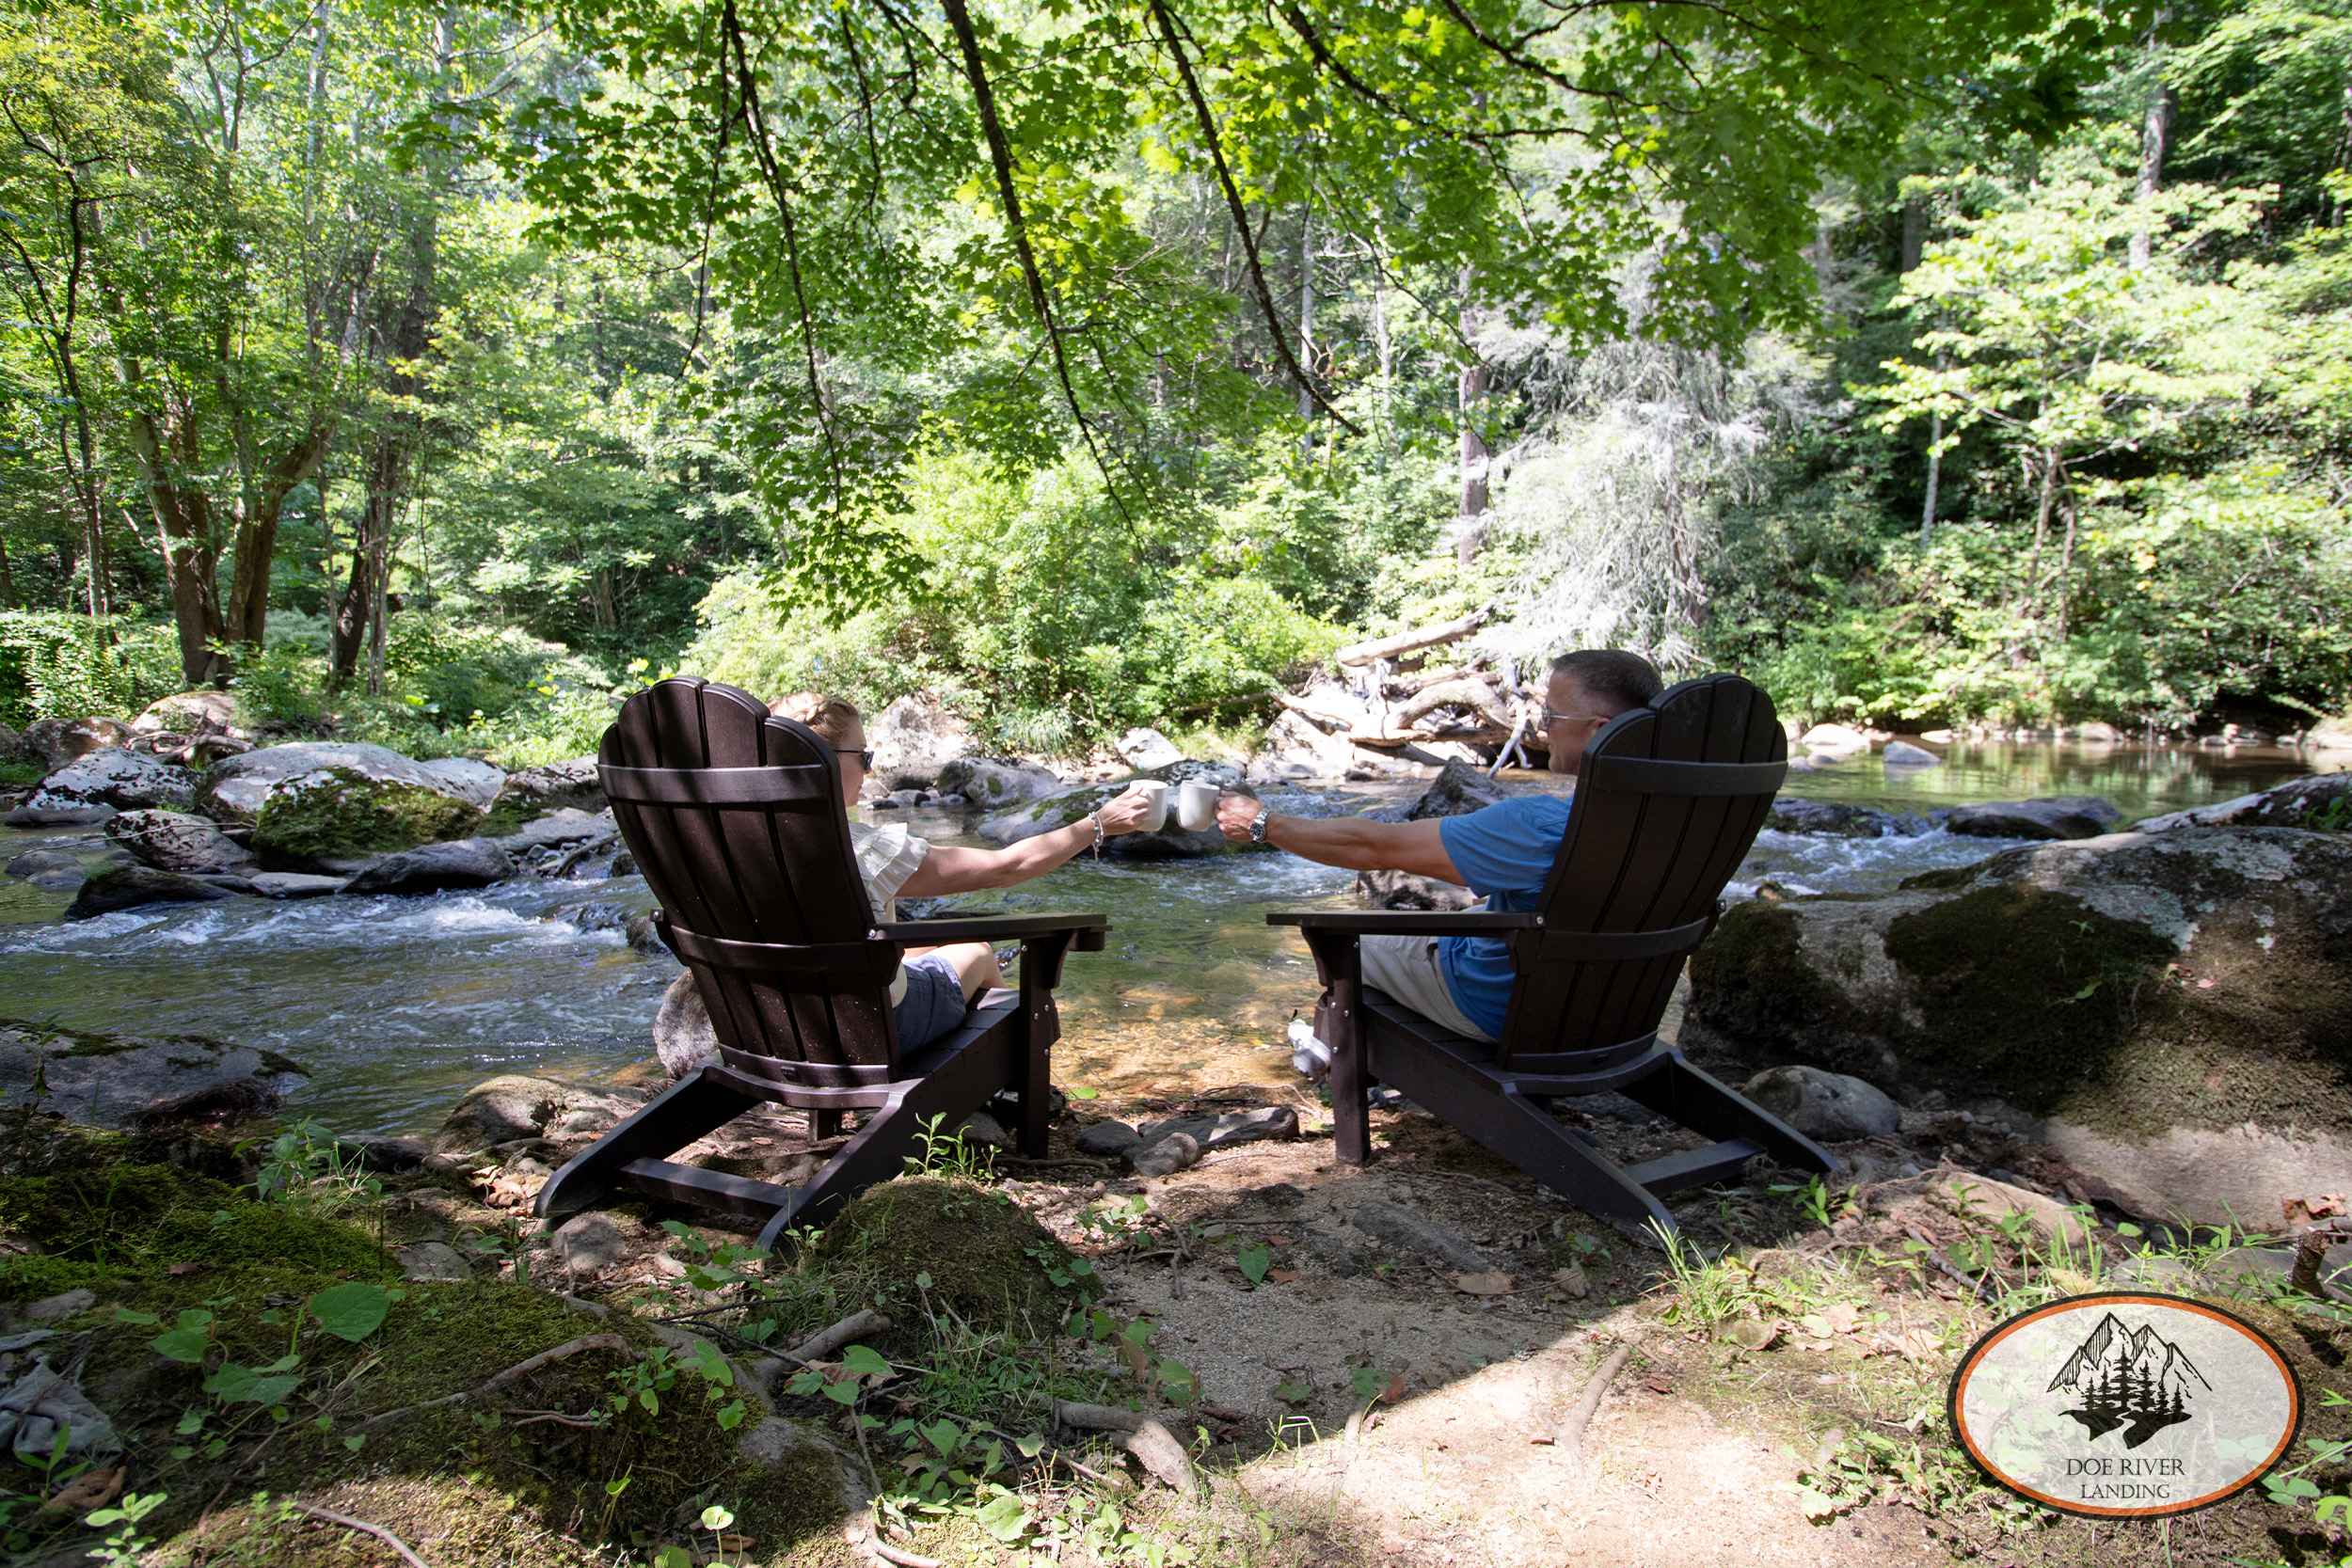 Doe River Landing campground in Roan Mountain, TN. Best vacation rental near Elizabethton, TN and Johnson City TN. Relax riverside and enjoy trout fishing, swimming, hiking, tubing, and more.